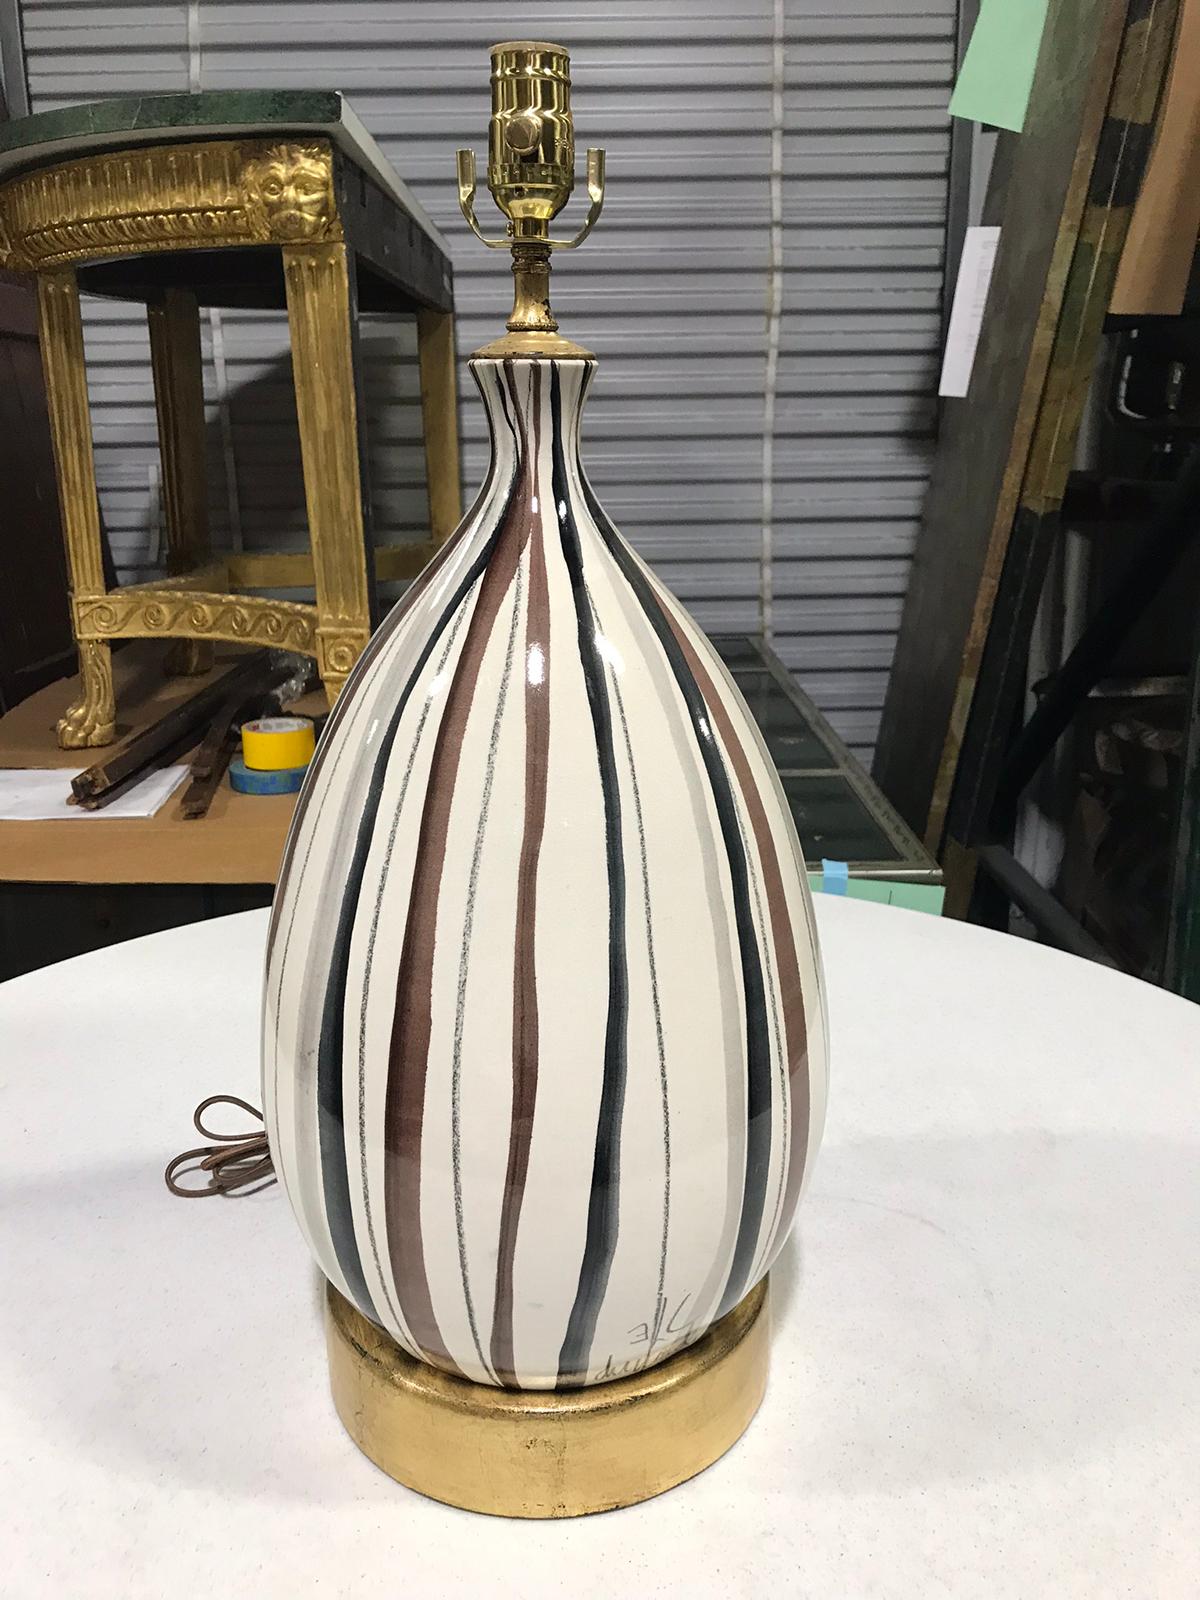 Mid-20th century French striped pottery lamp, signed
New wiring.